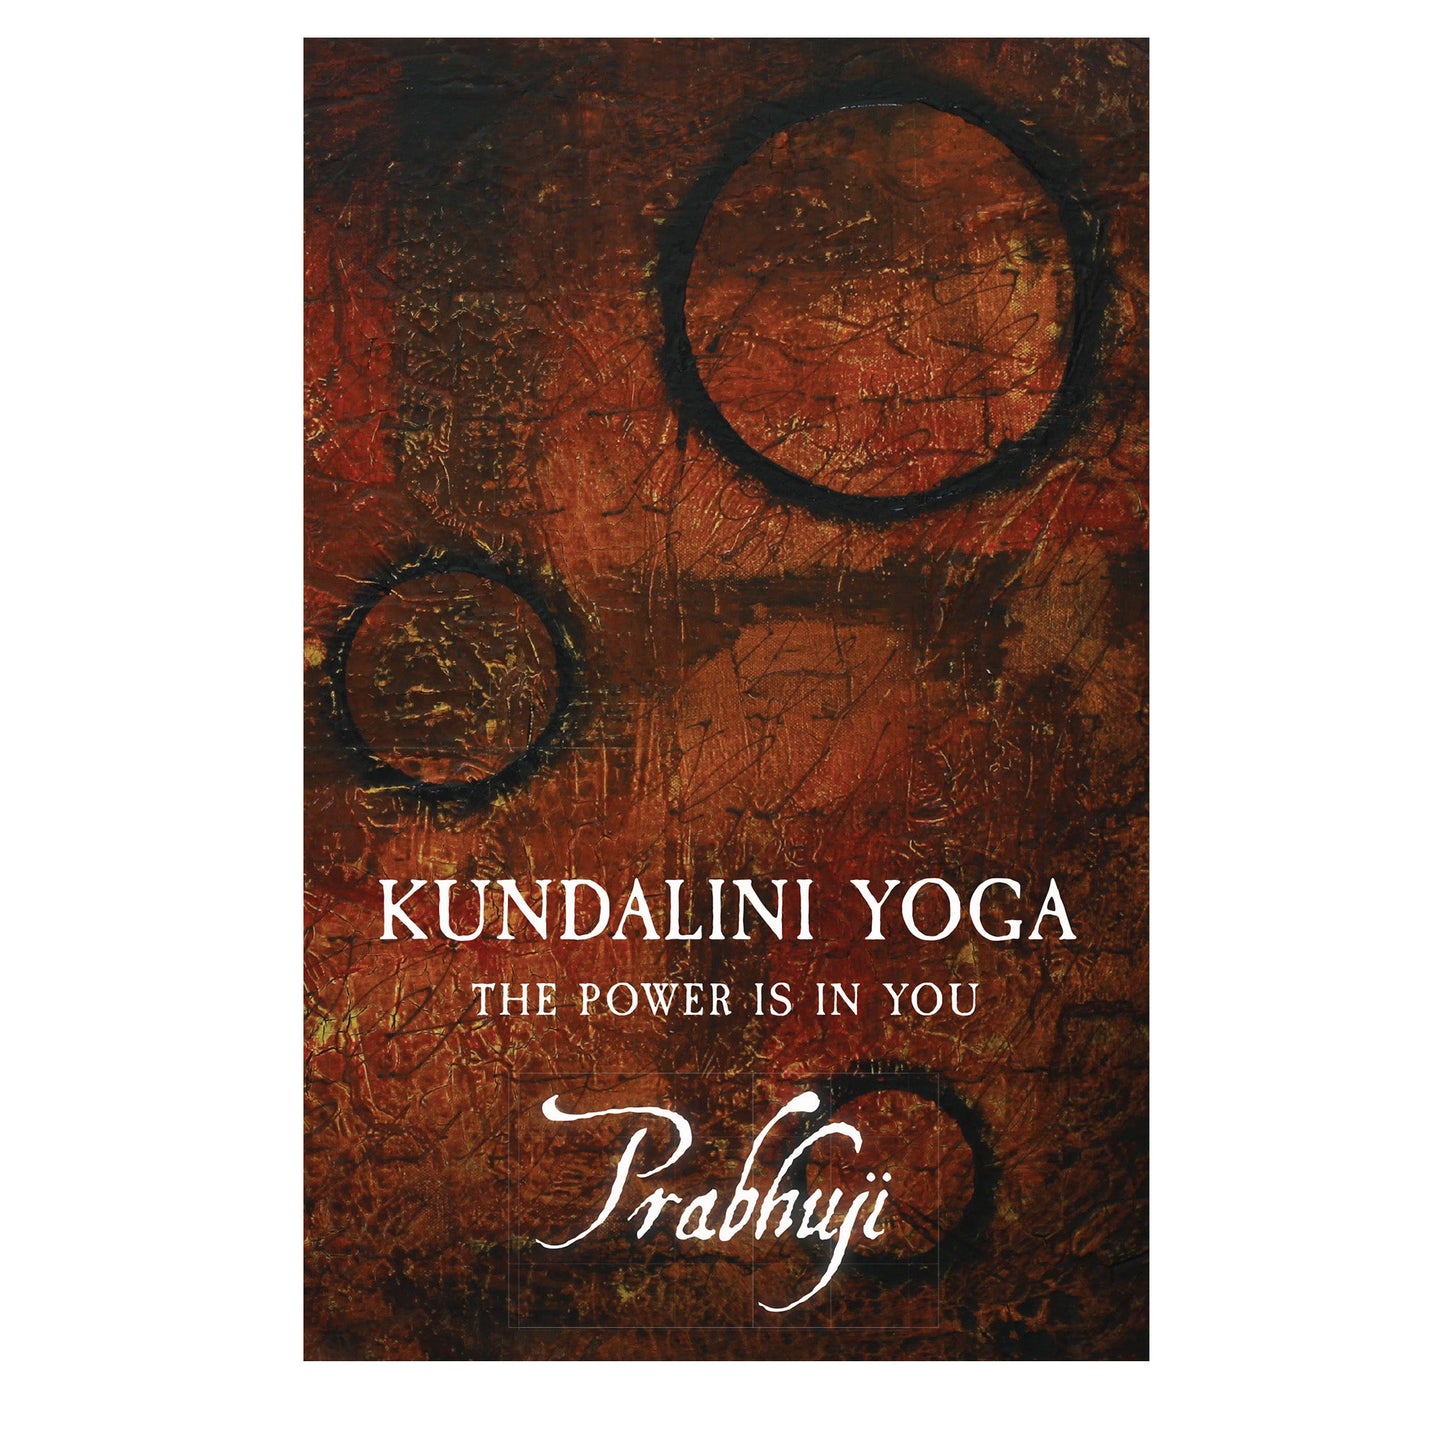 Book Kundalini yoga - the power is in you by Prabhuji (Paperback - English)